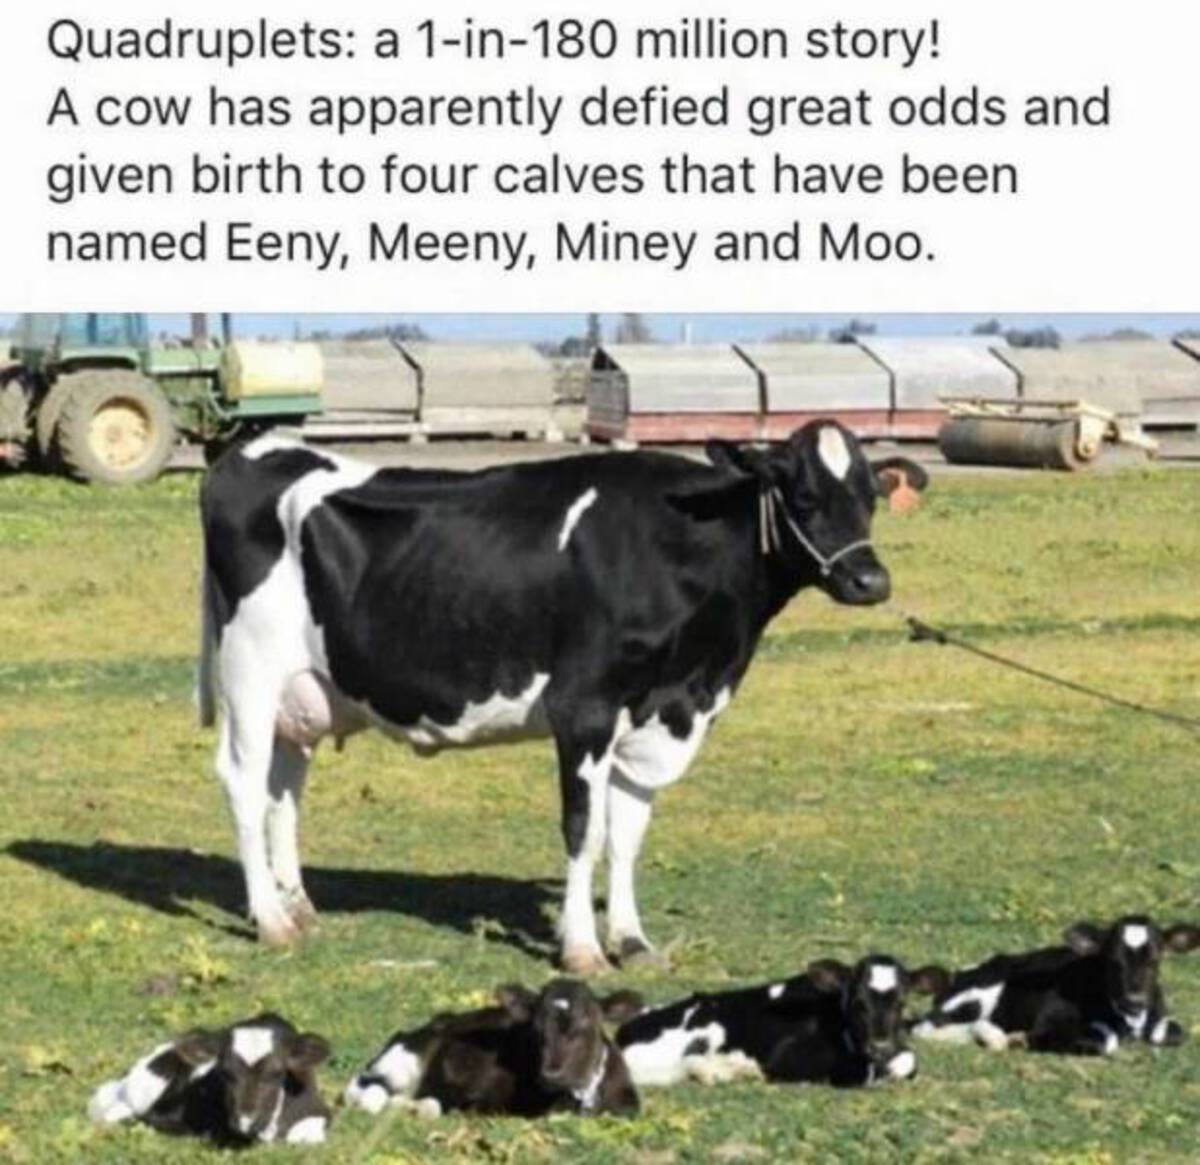 cow has quadruplets eeny meeny miny moo - Quadruplets a 1in180 million story! A cow has apparently defied great odds and given birth to four calves that have been named Eeny, Meeny, Miney and Moo.